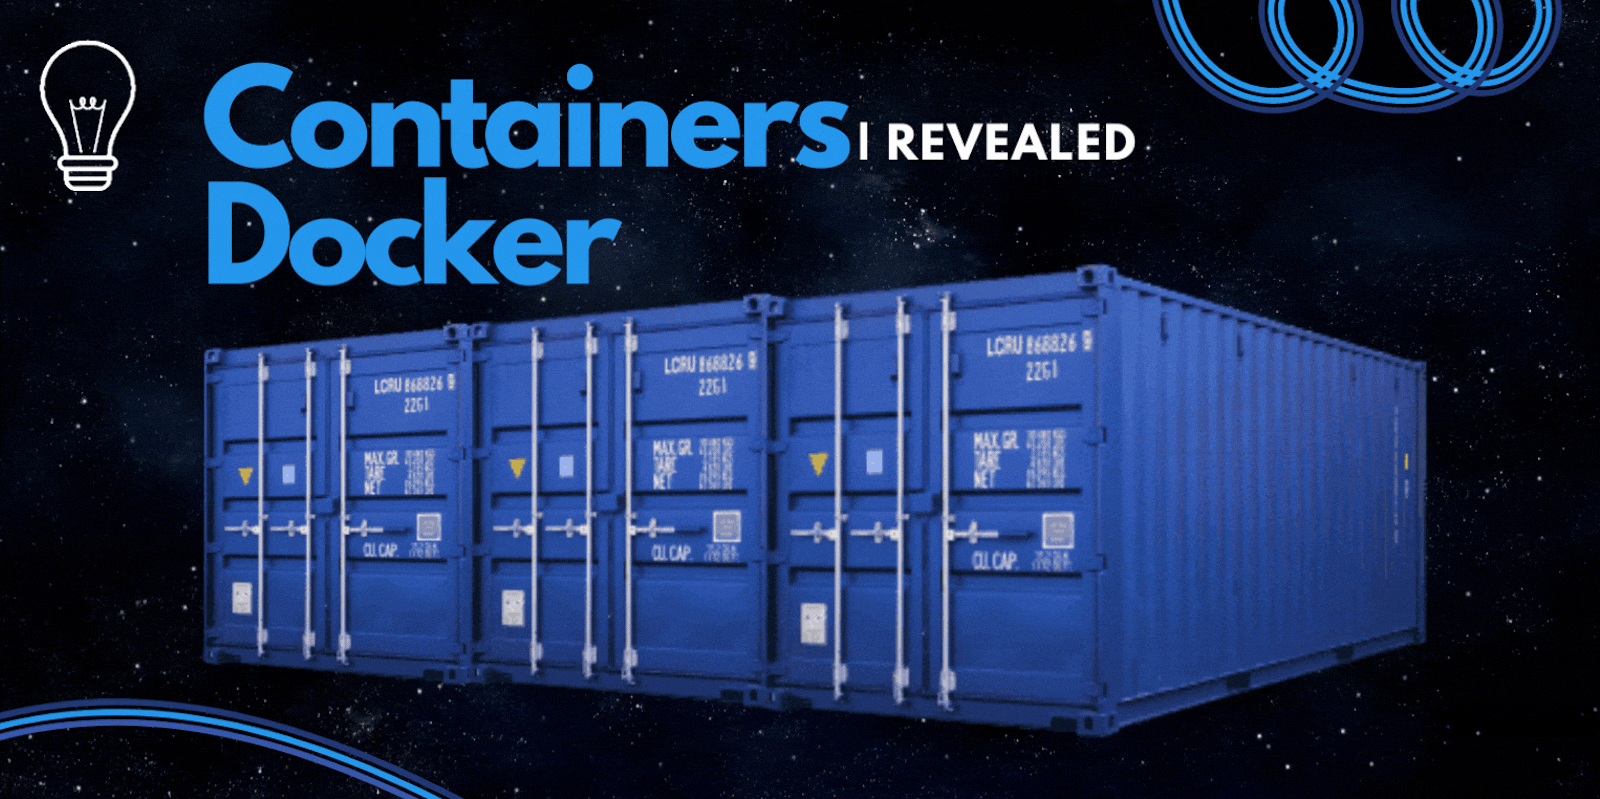 Containers, Docker | What exactly is that?